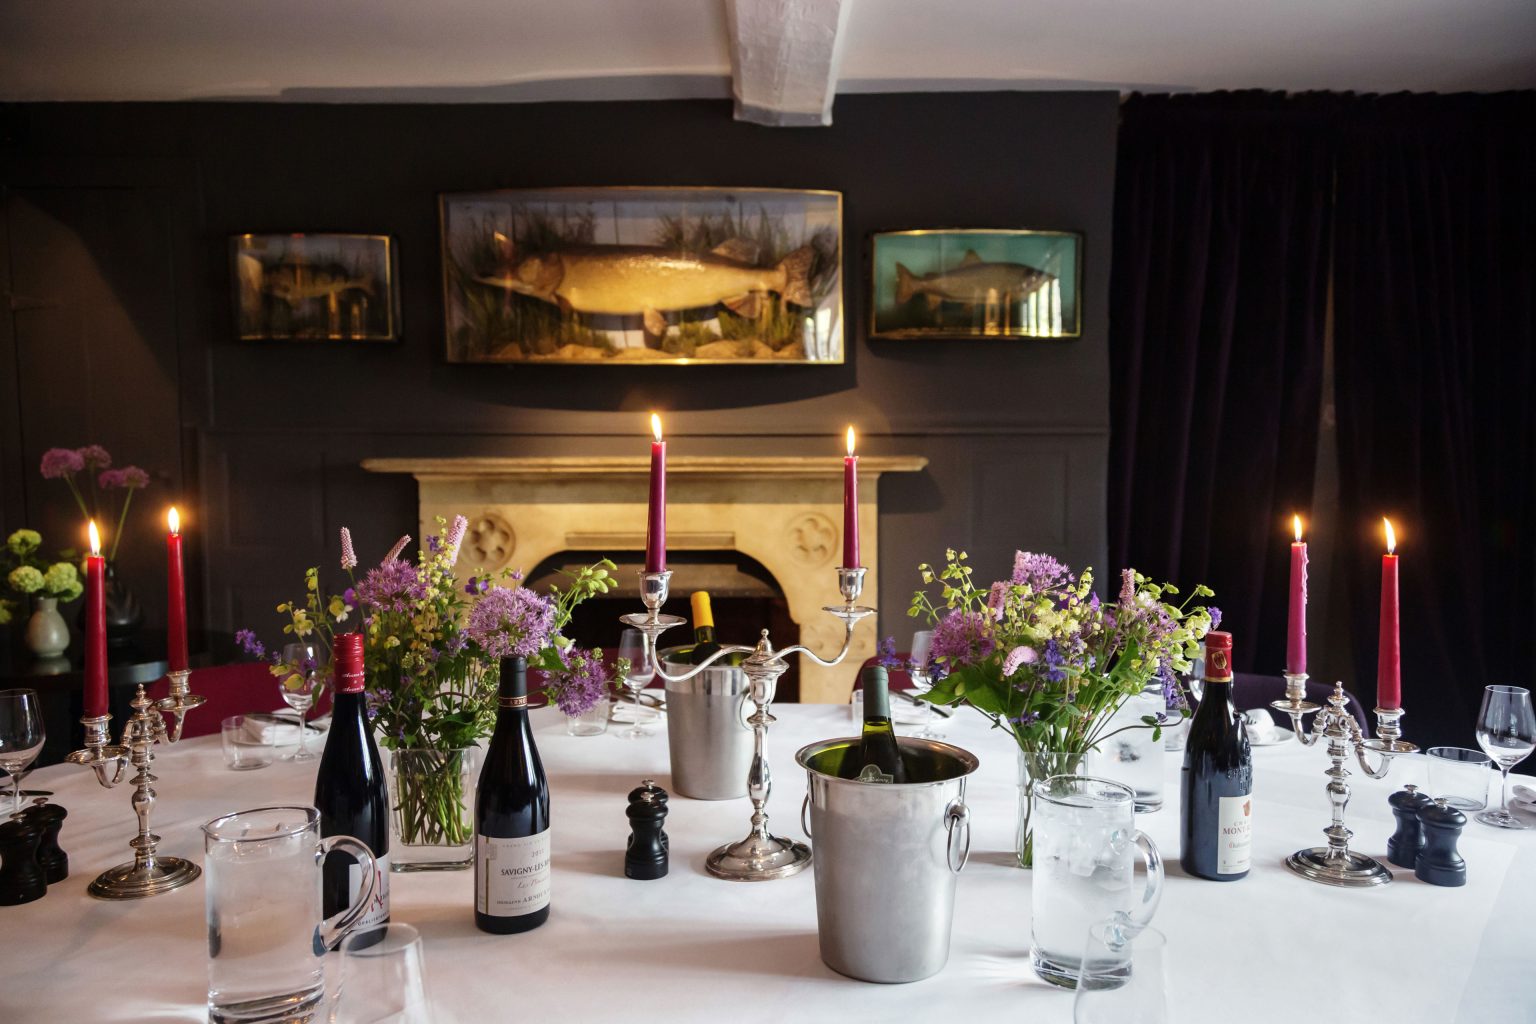 0041 - 2014 - Parsonage Grill - Oxford - Low Res - Pike Room Private Dining Celebration - Web Hero